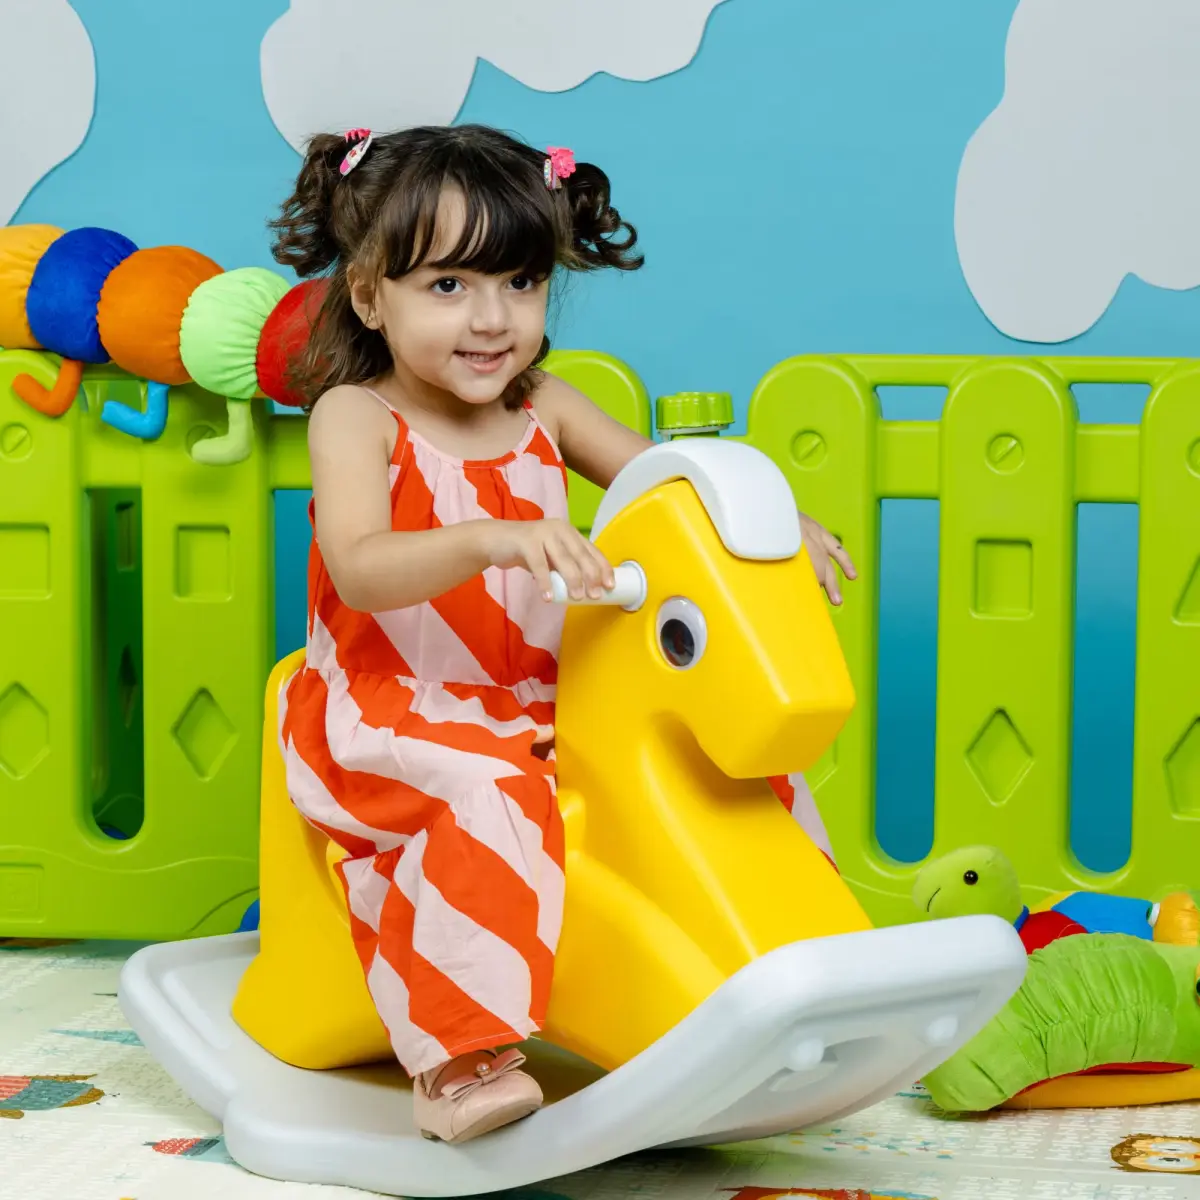 Zoozi  2 in 1 Ride On Rocking Horse for Toddlers and Babies, Comes with Wheels, Yellow, 12M+